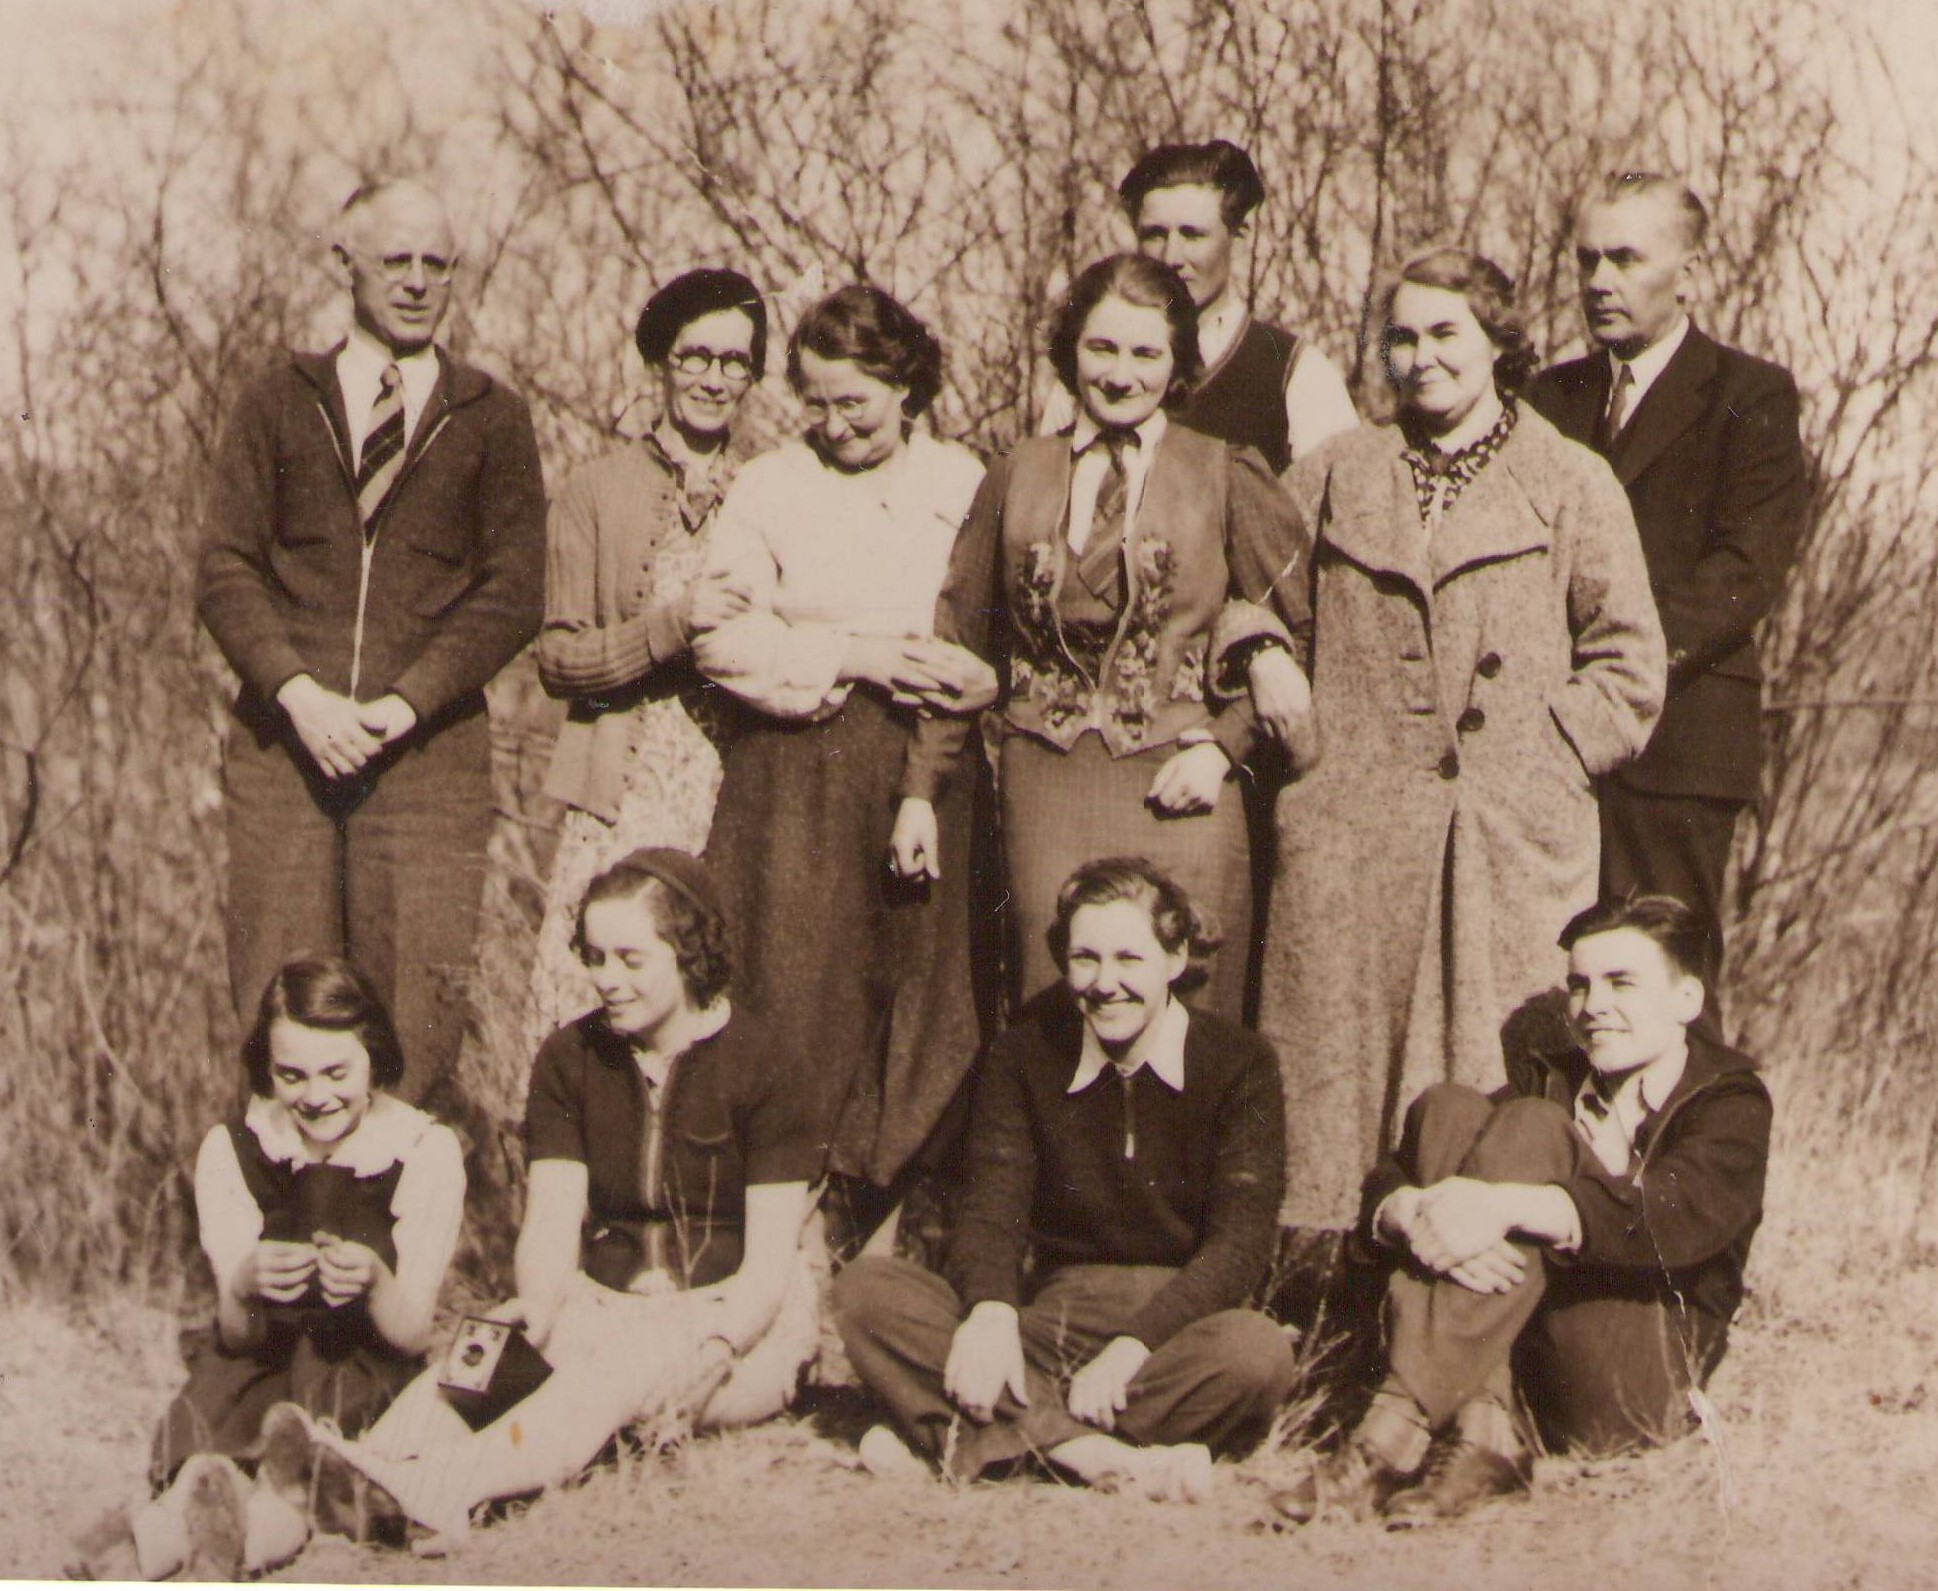 Our best guess is that this is the Boire family- but that is solely based on the fact that the young girl (front row second from left) is holding a camera identical to one we have in our collection that belonged to Rachel Boire. This also dates the images as being older then 1934 as that is when Kodak began manufacturing the camera!
990.4-81-13 / Rocky Lane School